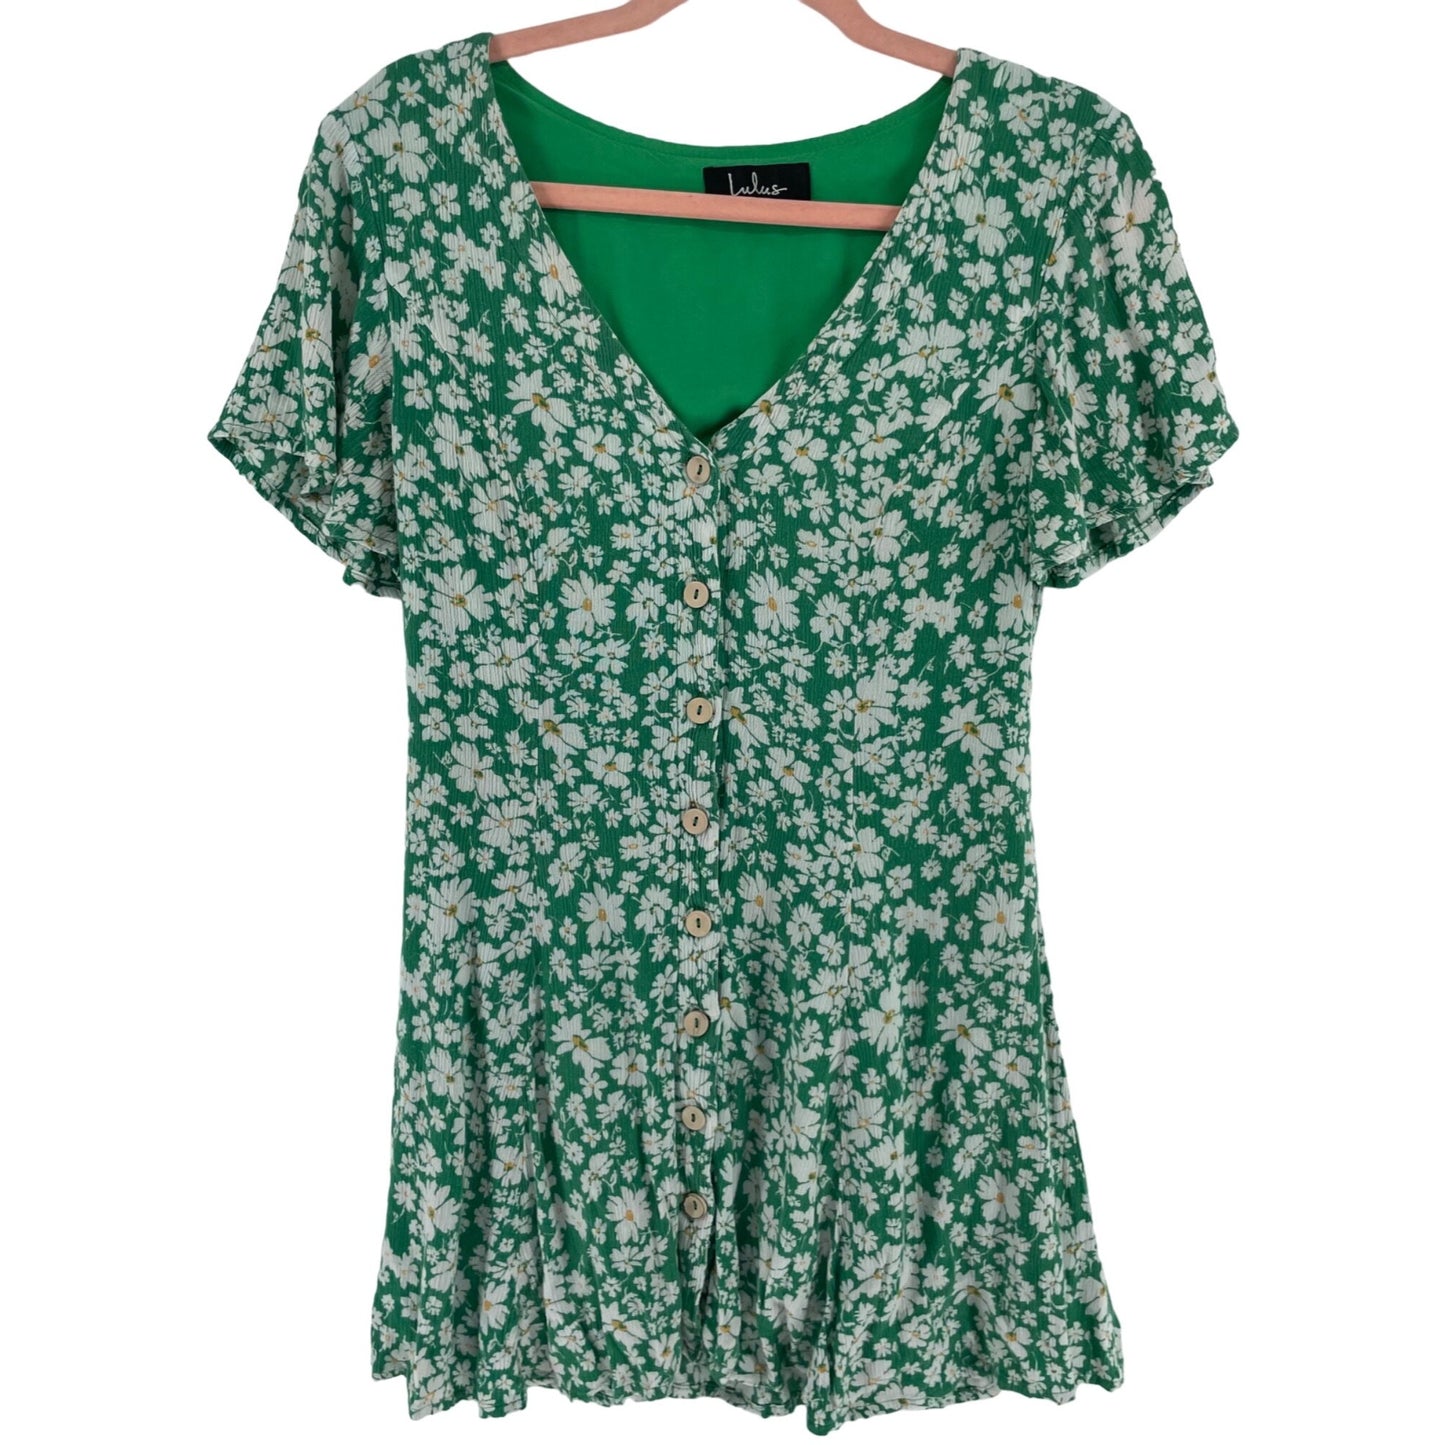 Lulus Women's Size Small Green, White & Yellow Floral Button-Down Dress